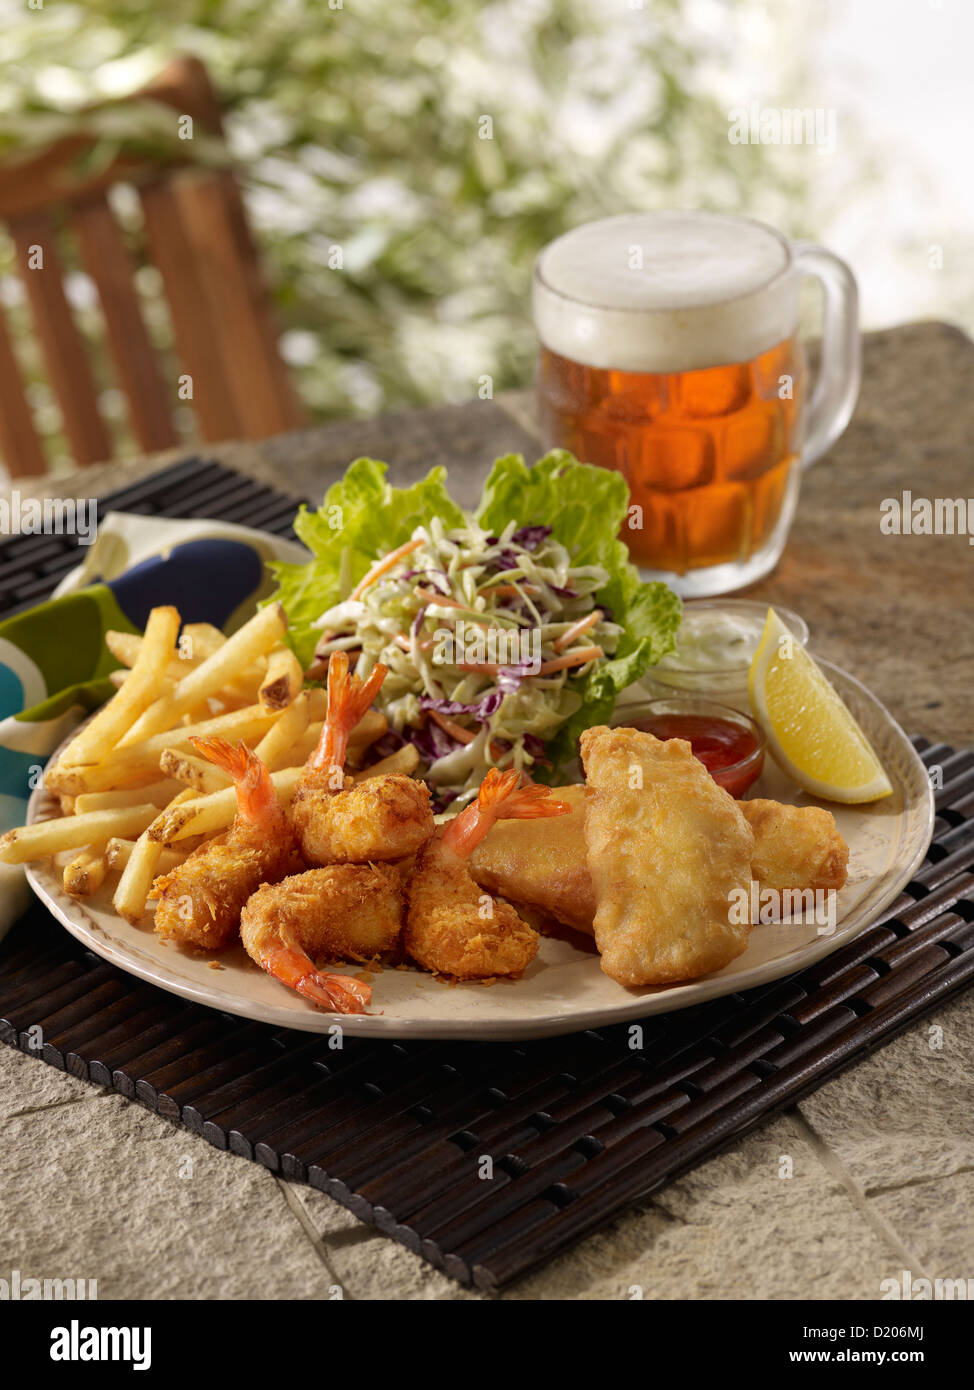 Fried shrimp and fish meal in an outdoor setting Stock Photo